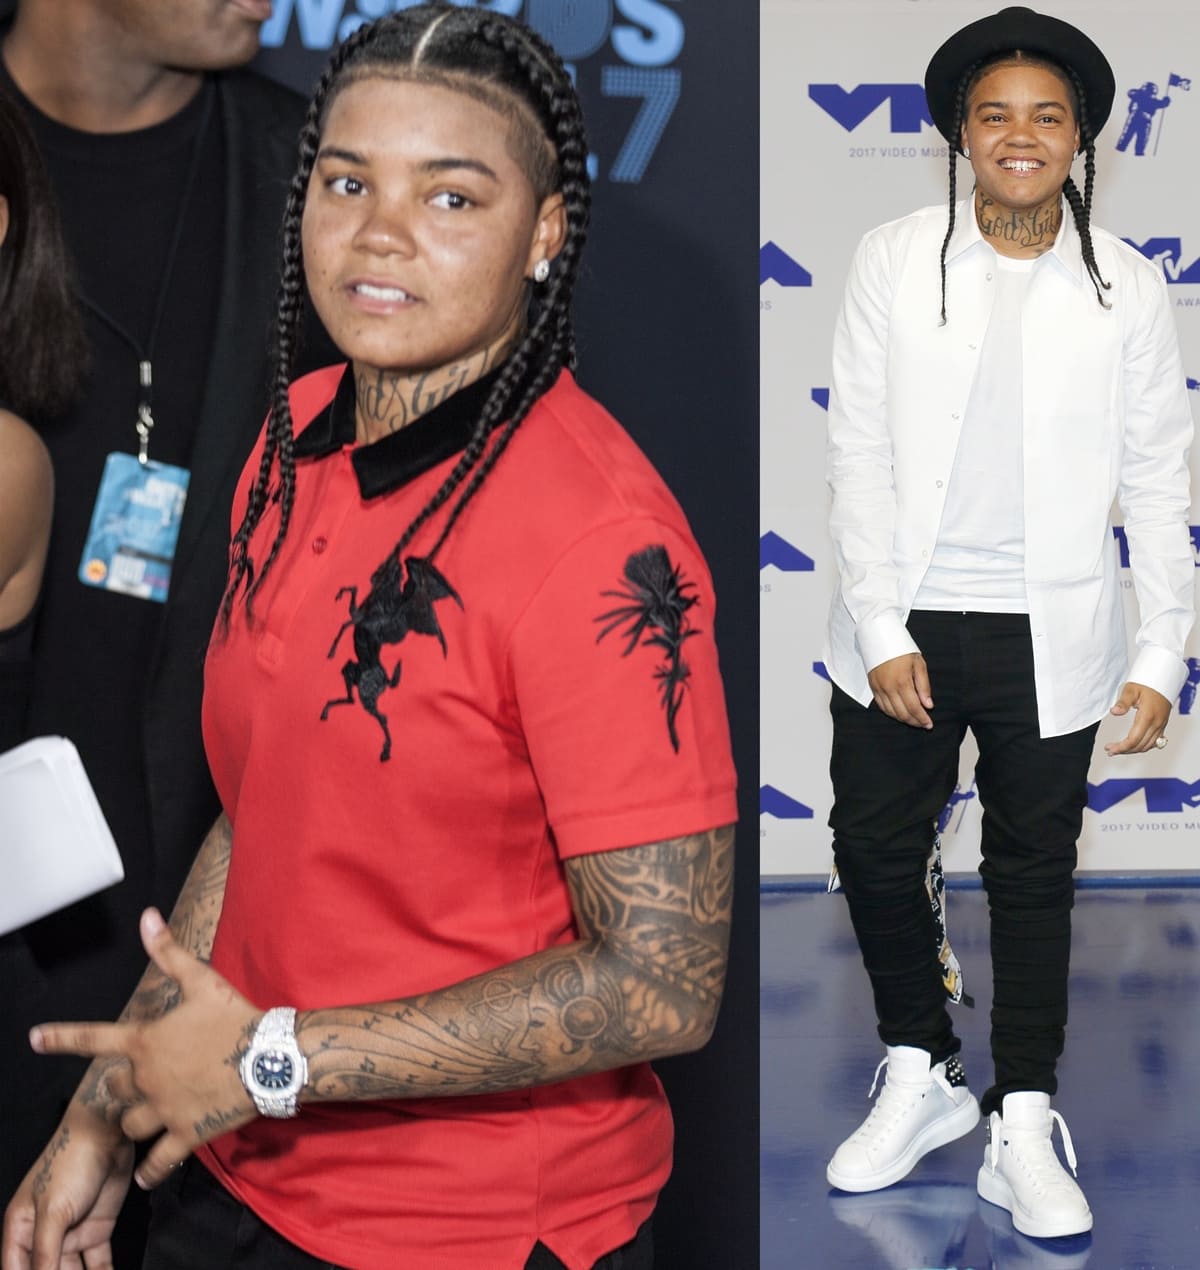 Katorah Kasanova Marrero, better known by her stage name Young M.A, became famous in 2016 with the release of the quadruple-platinum hit single Ooouuu